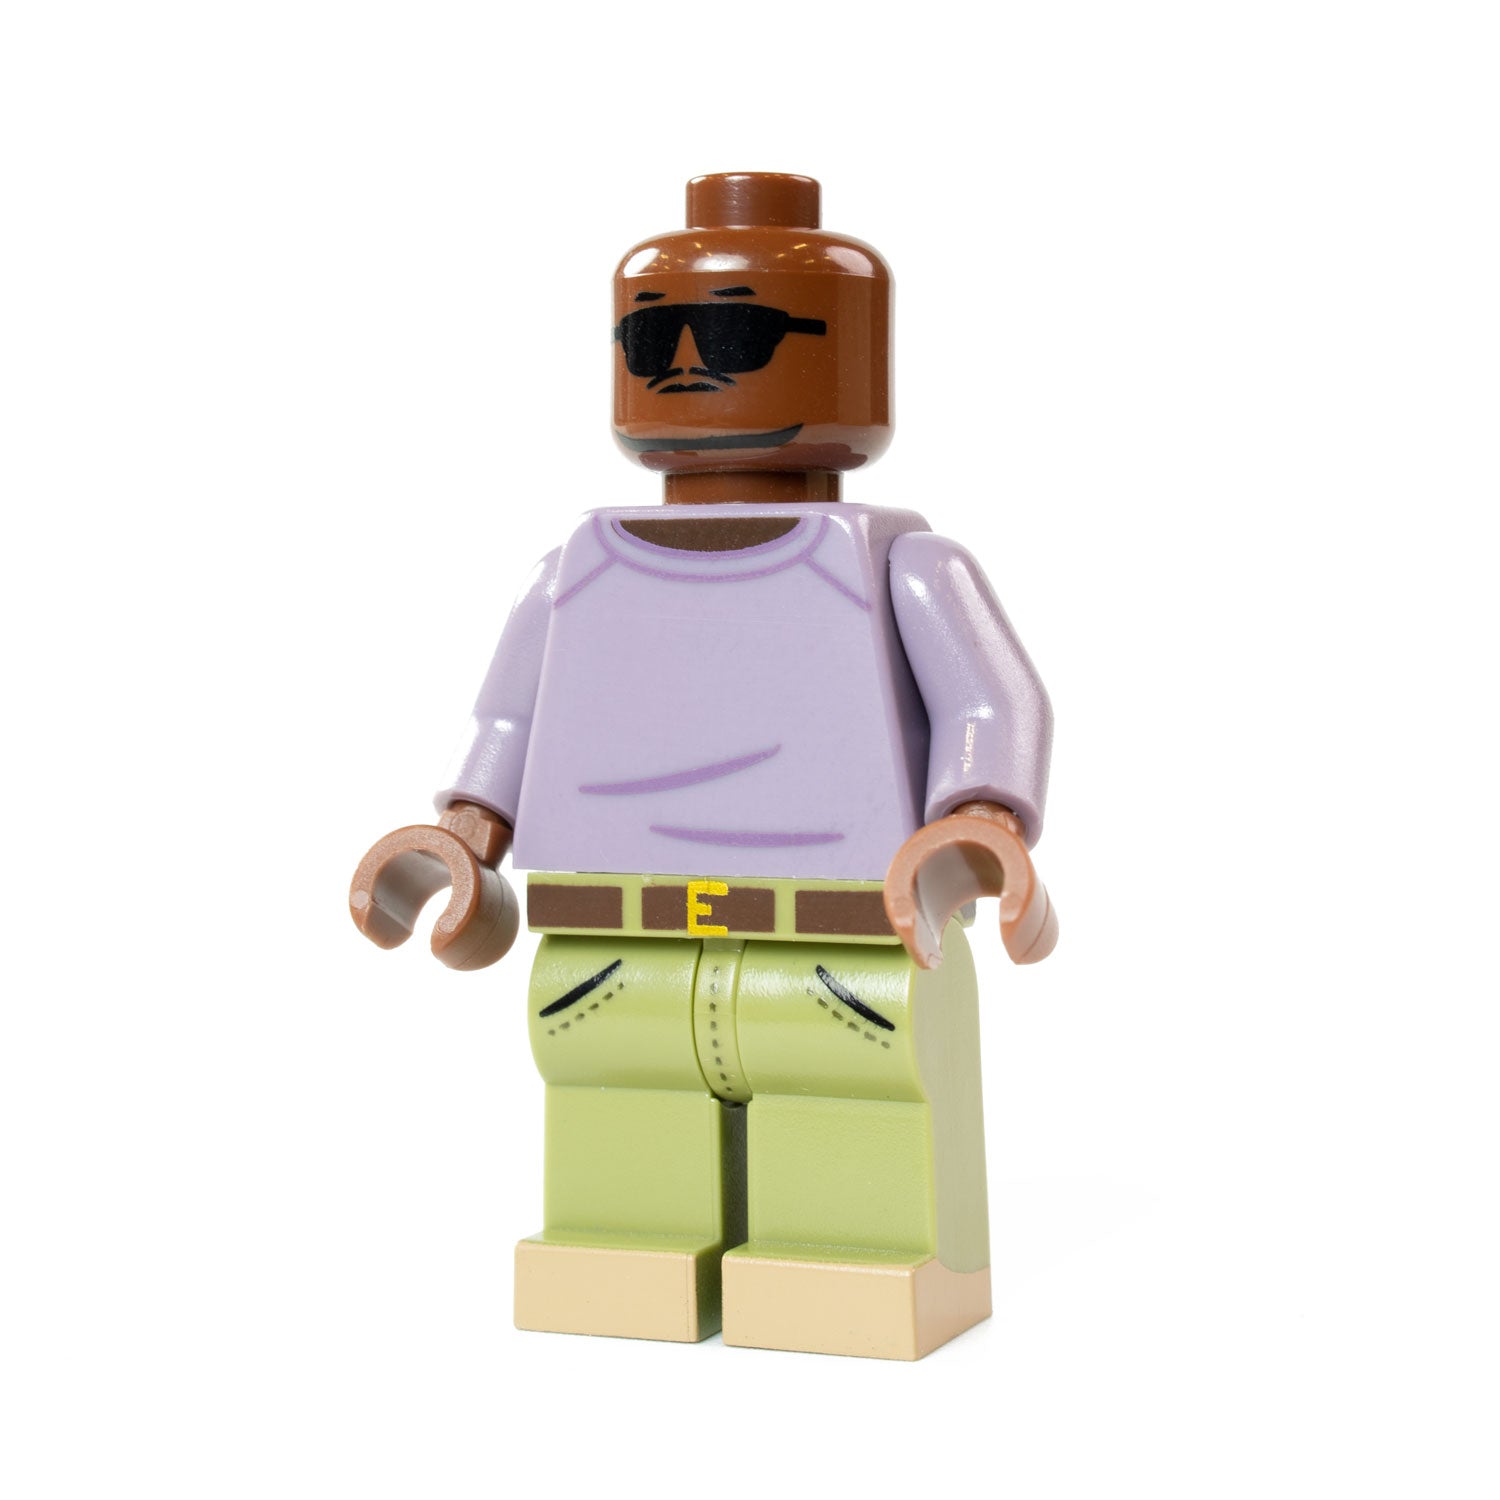 Brawling | The Minifig Co.